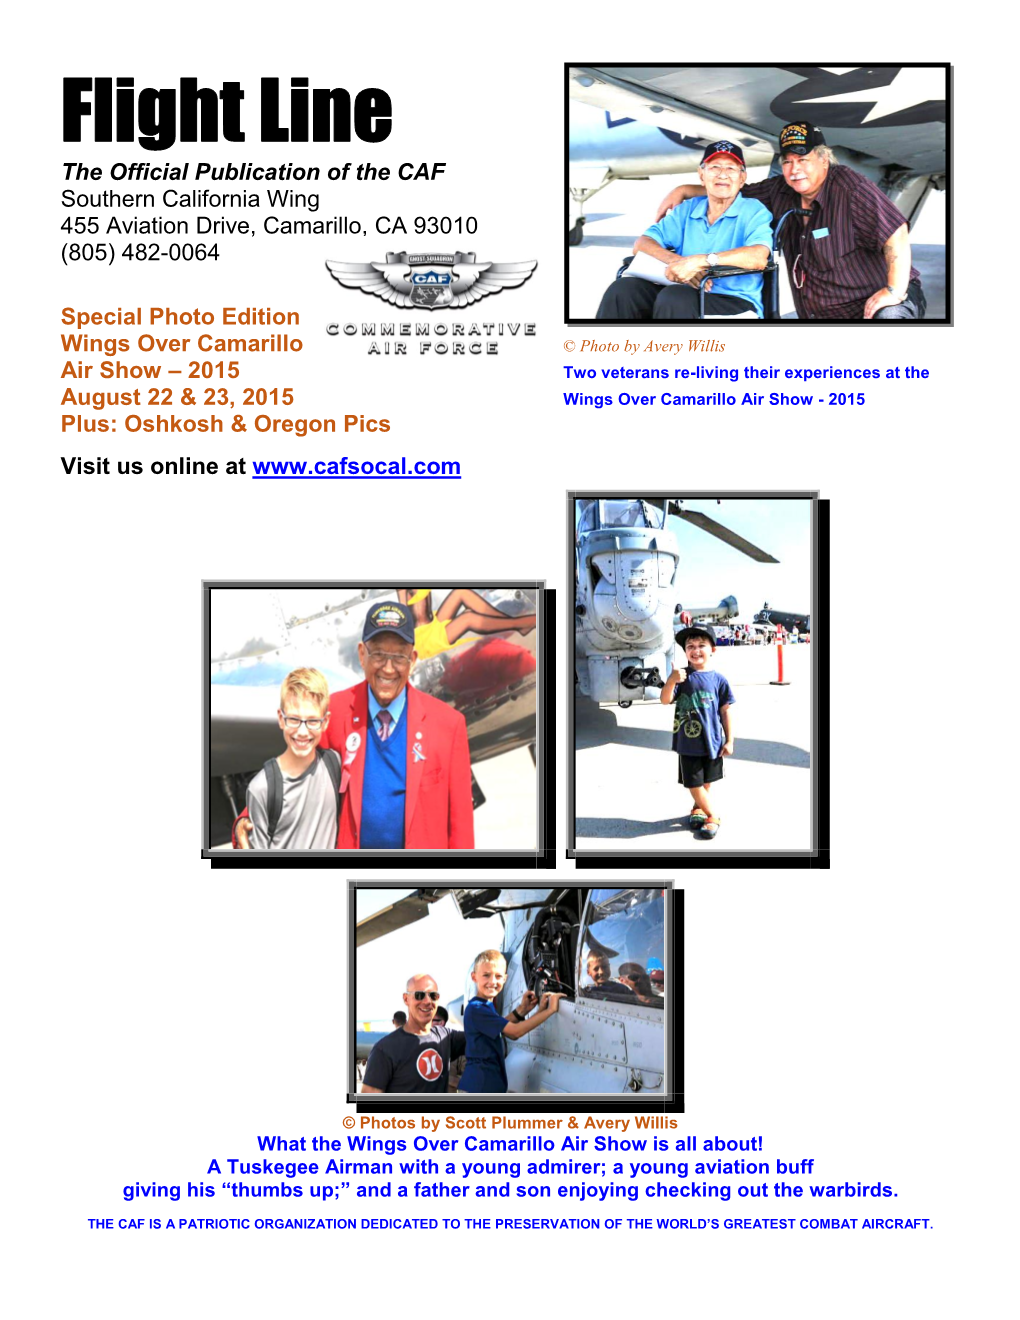 Flight Line the Official Publication of the CAF Southern California Wing 455 Aviation Drive, Camarillo, CA 93010 (805) 482-0064